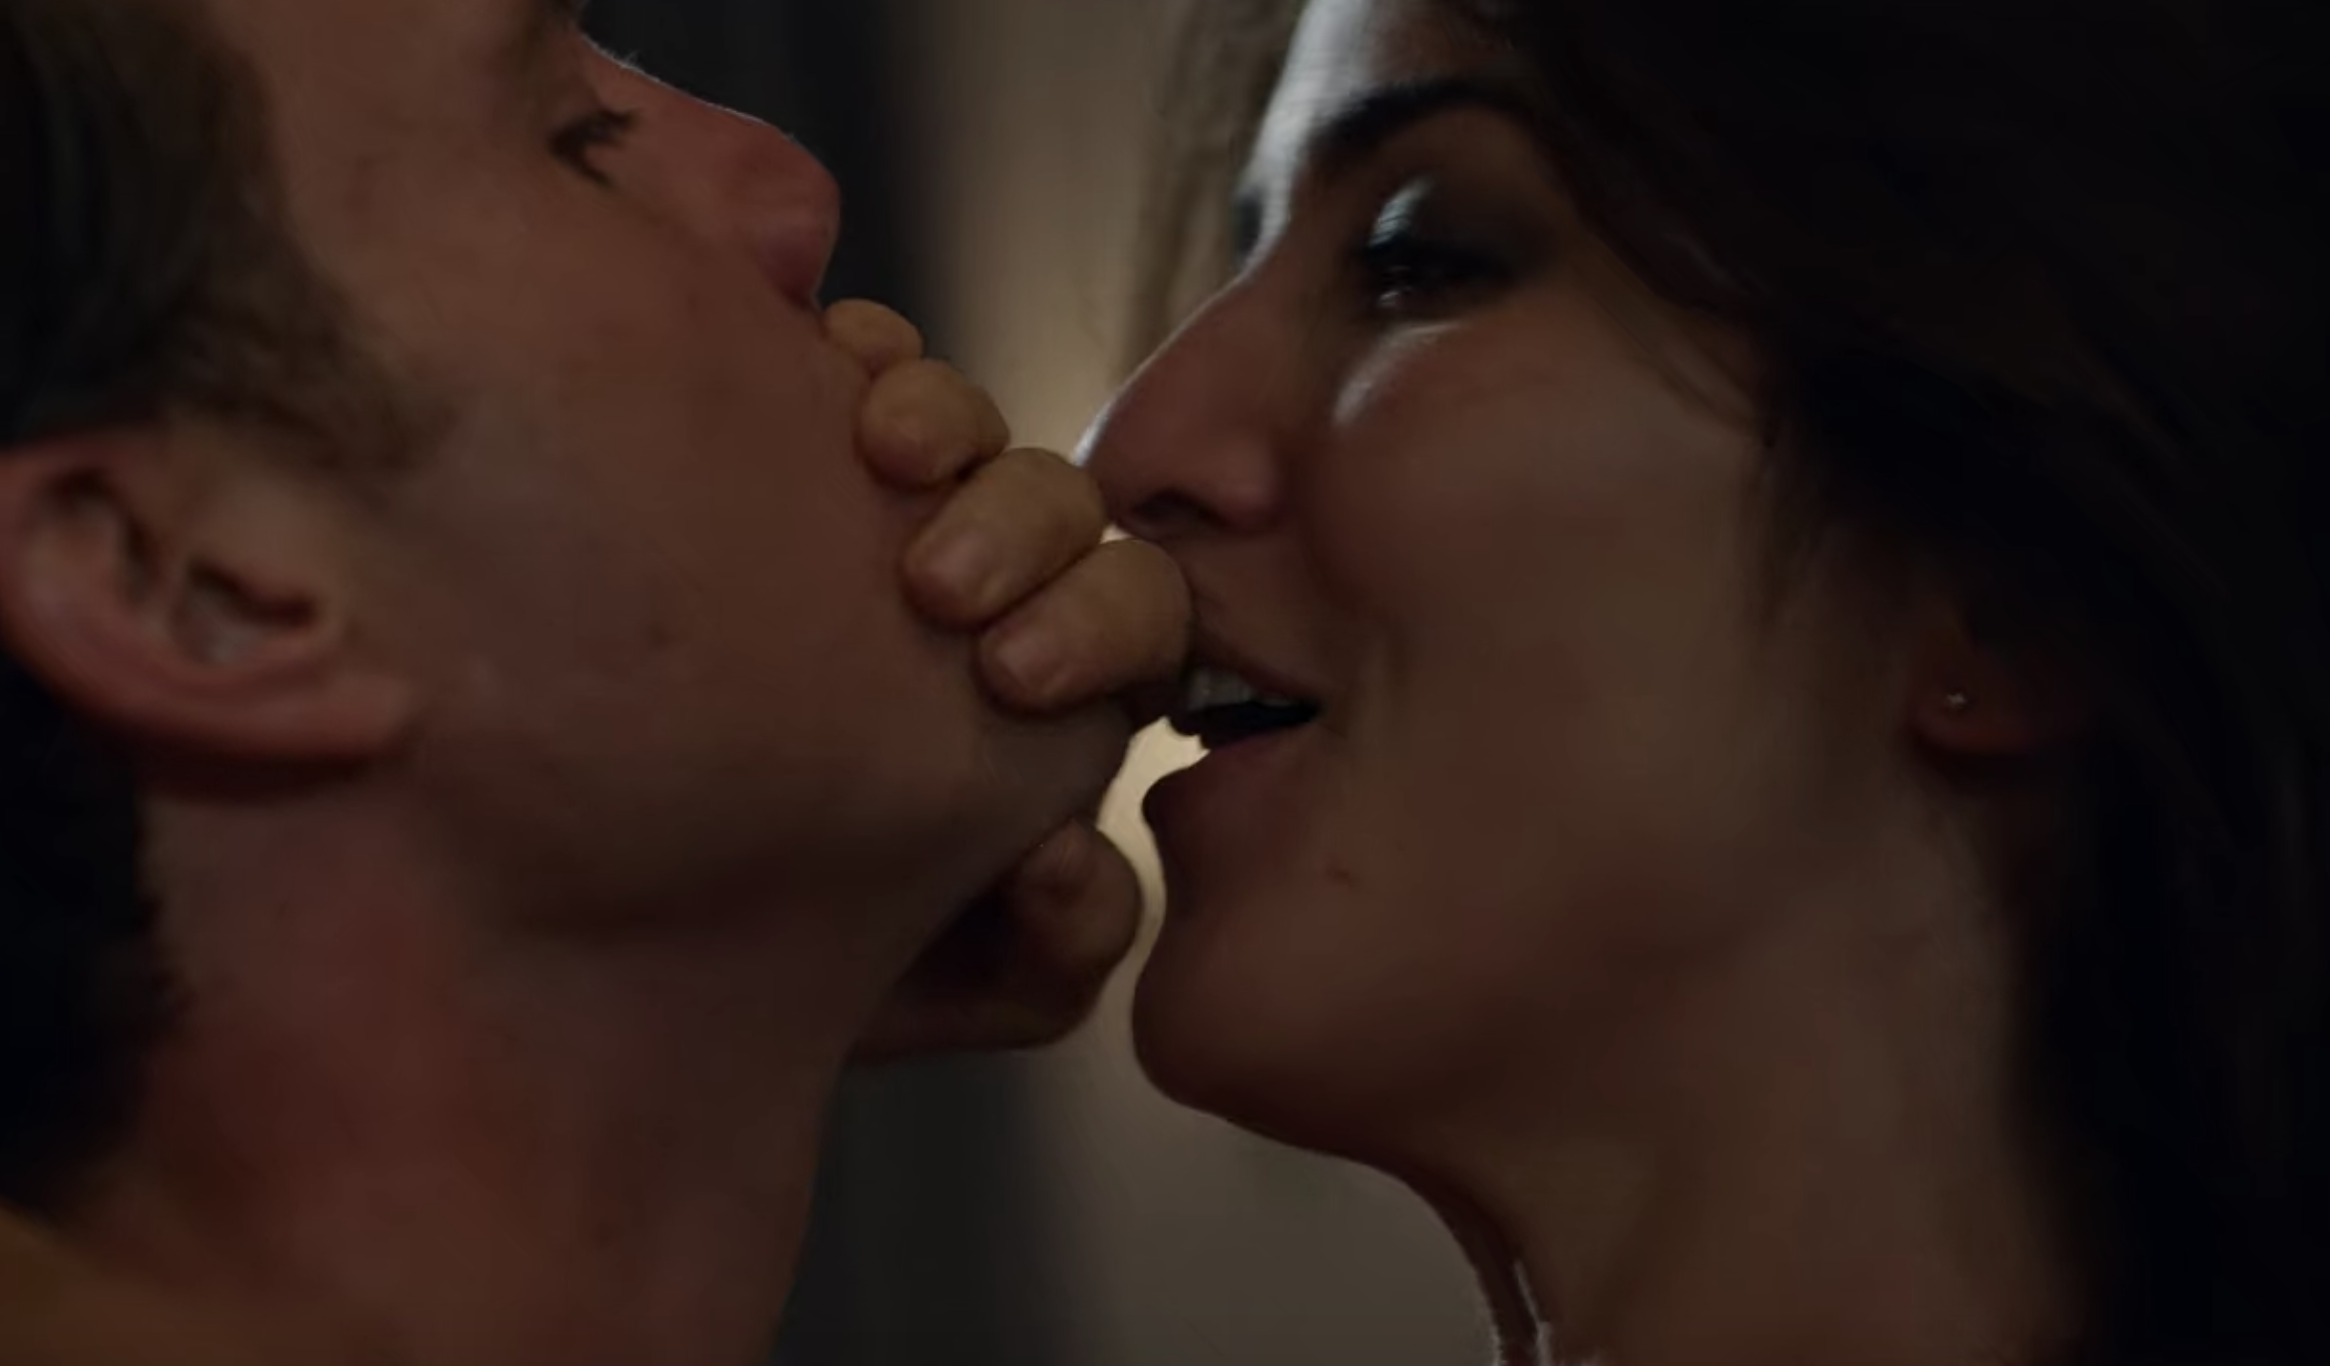 Netflix series with the most sex scenes